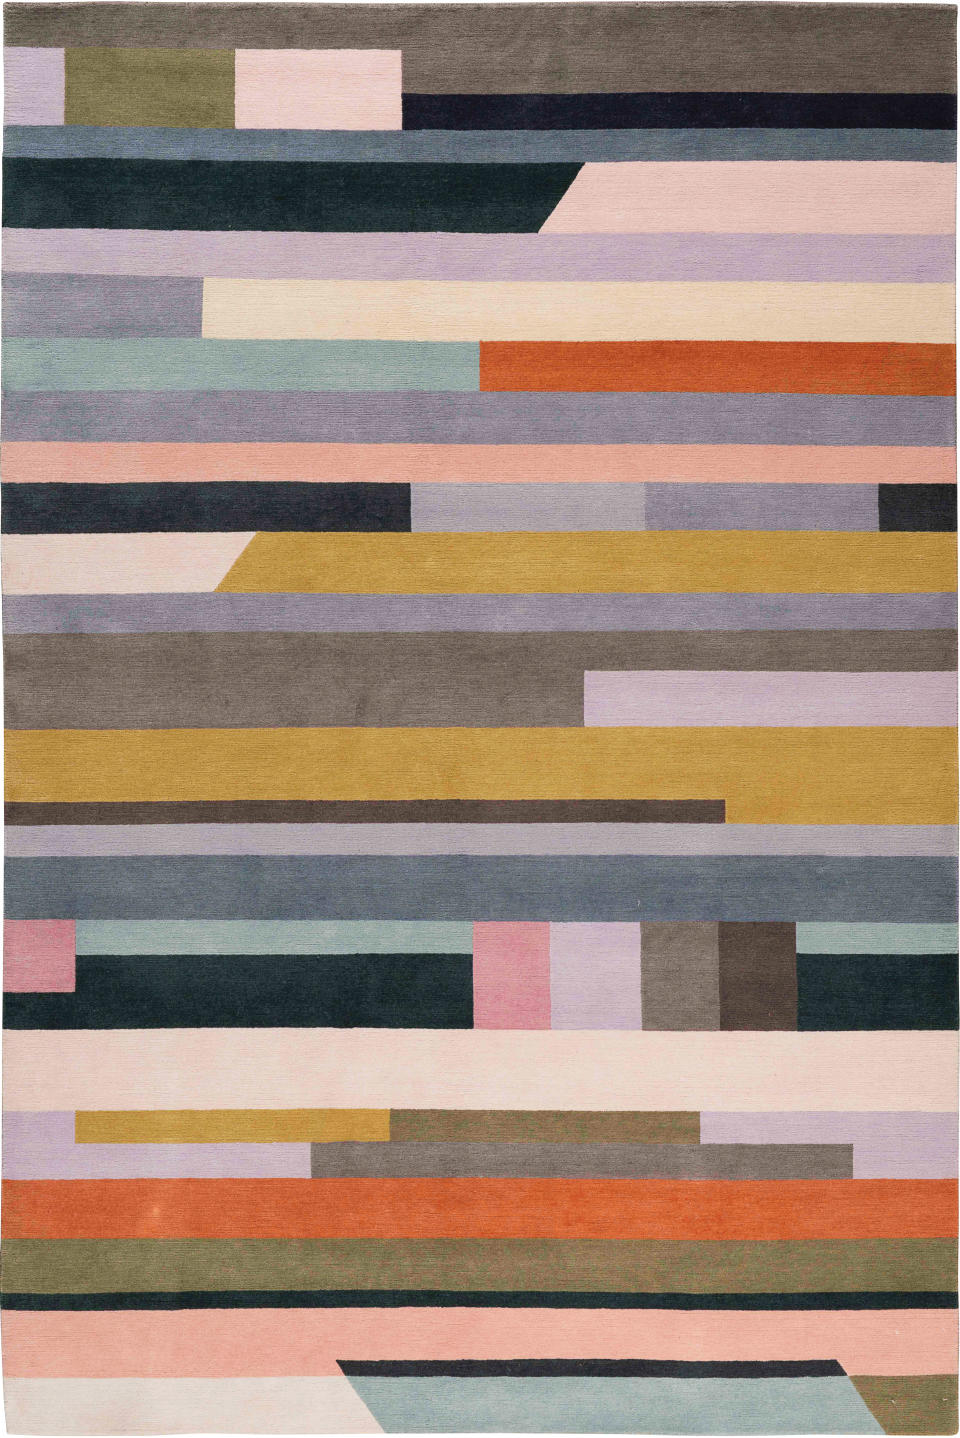 Paul Smith Interval rug; $158 per sq. ft. therugcompany.com